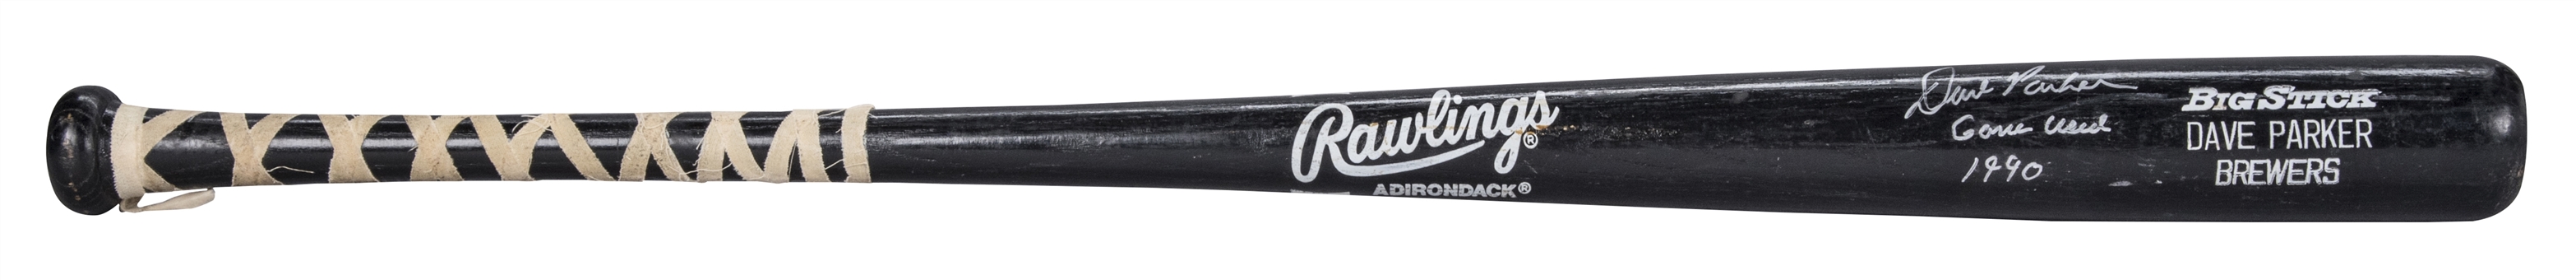 1990 Dave Parker Game Used, Signed & Inscribed Rawlings 423A Model Bat (PSA/DNA & Beckett)